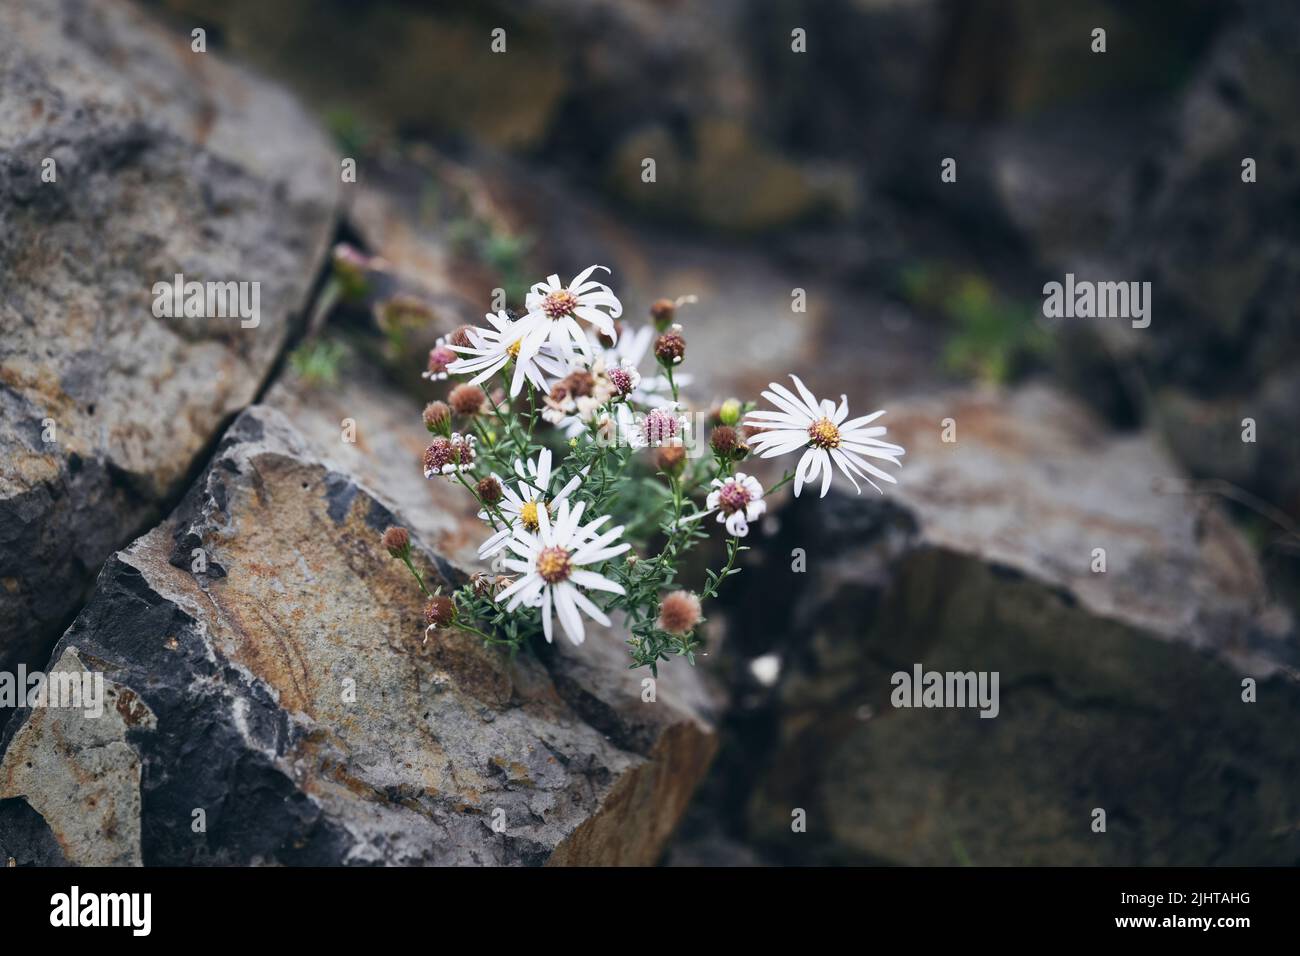 The high-angle view of the Calico aster flower plant growing through the rocks Stock Photo